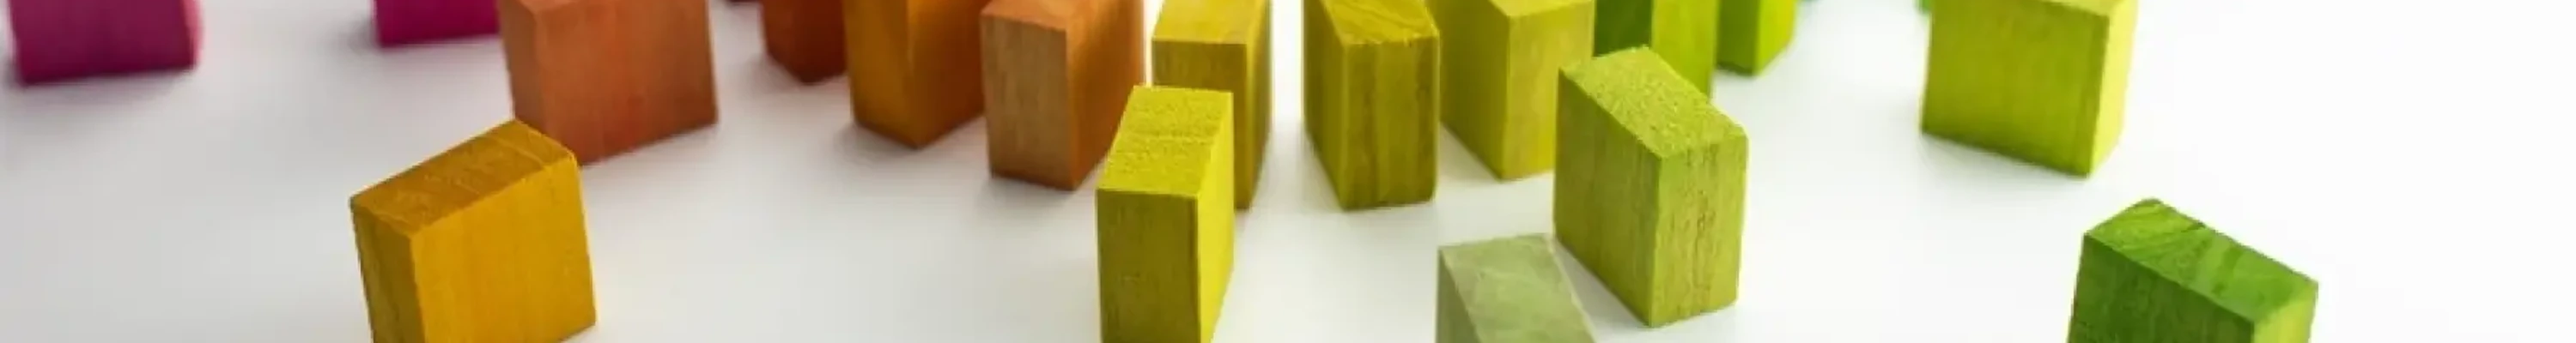 Coloured wooden blocks to represent data feeds